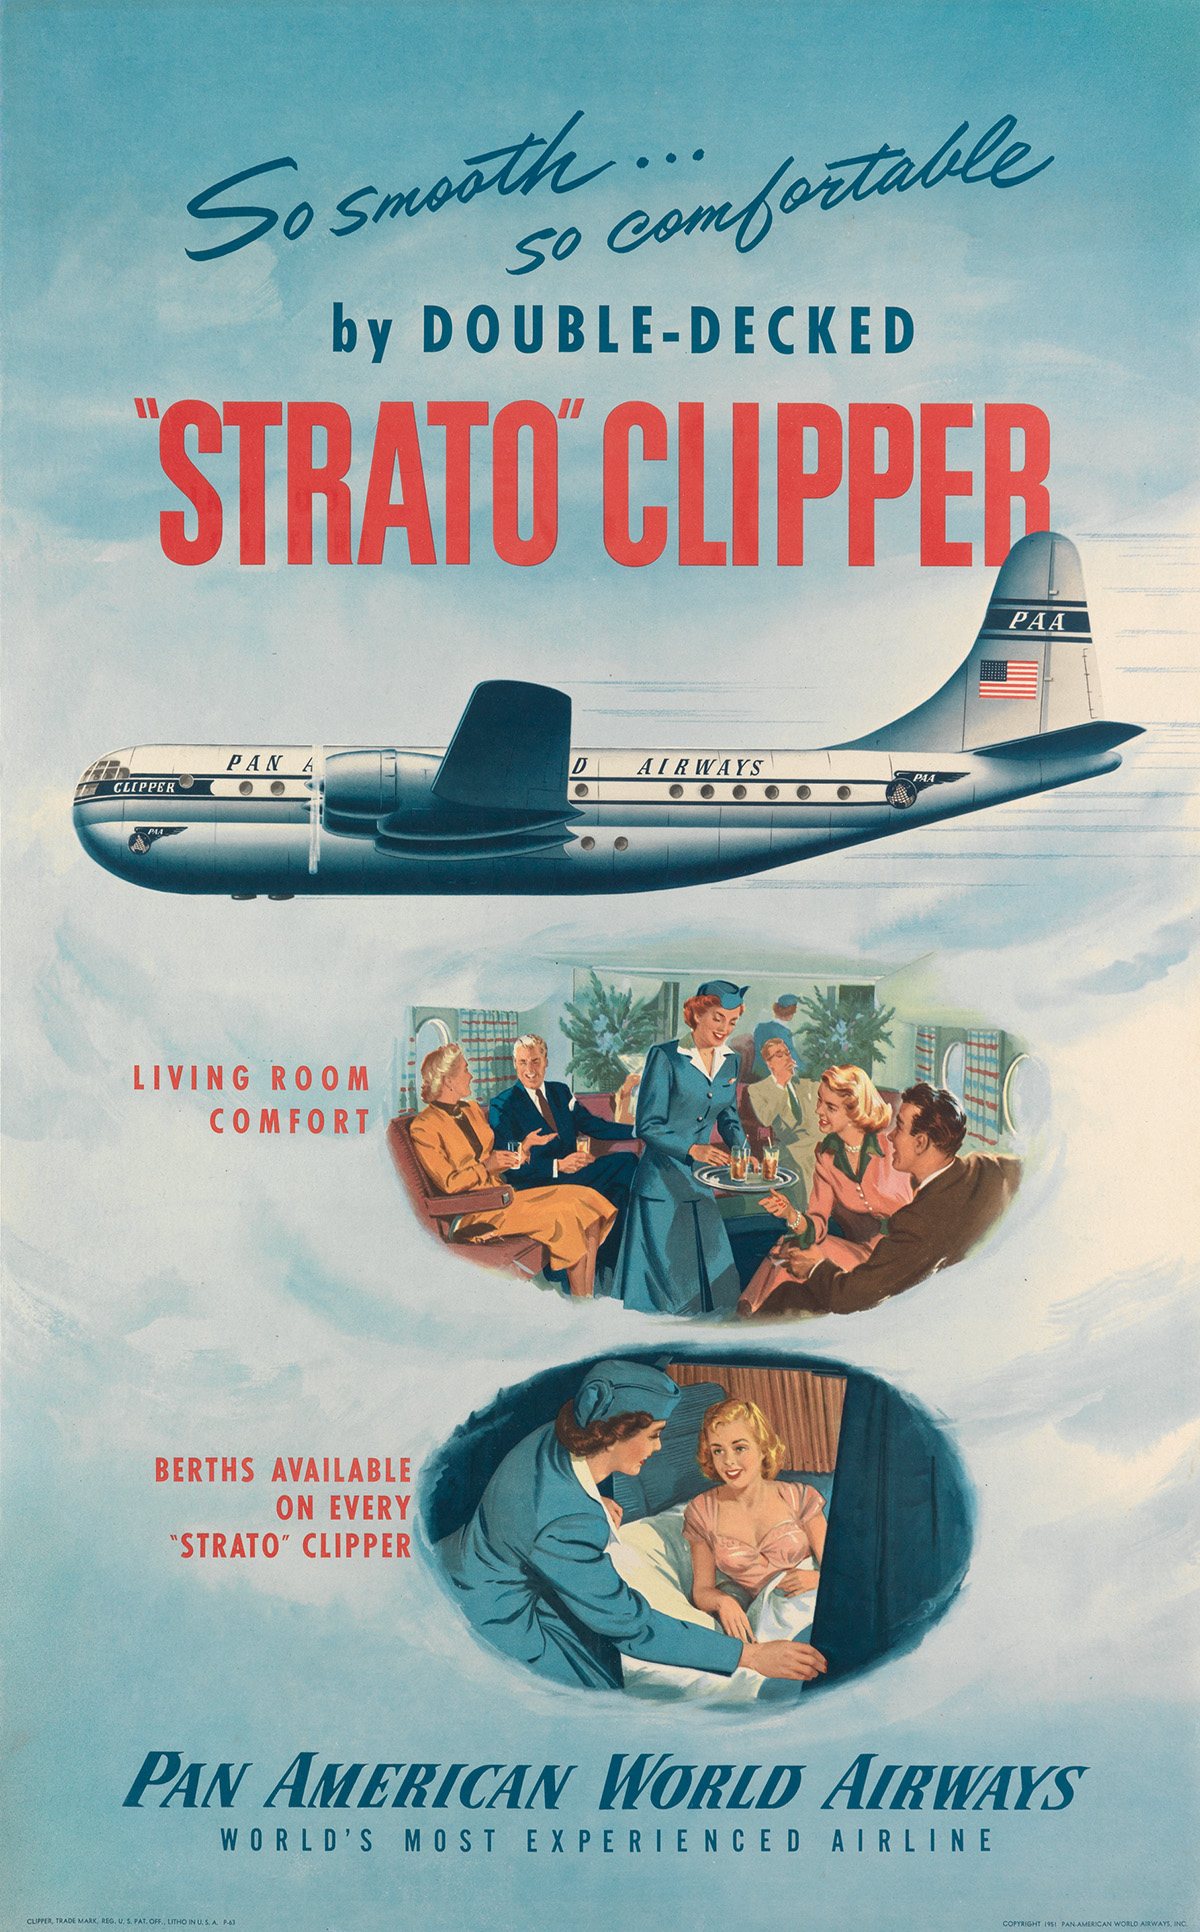 Details about   Pan American Double-decked Super Strato Clipper   Vintage Postcard 